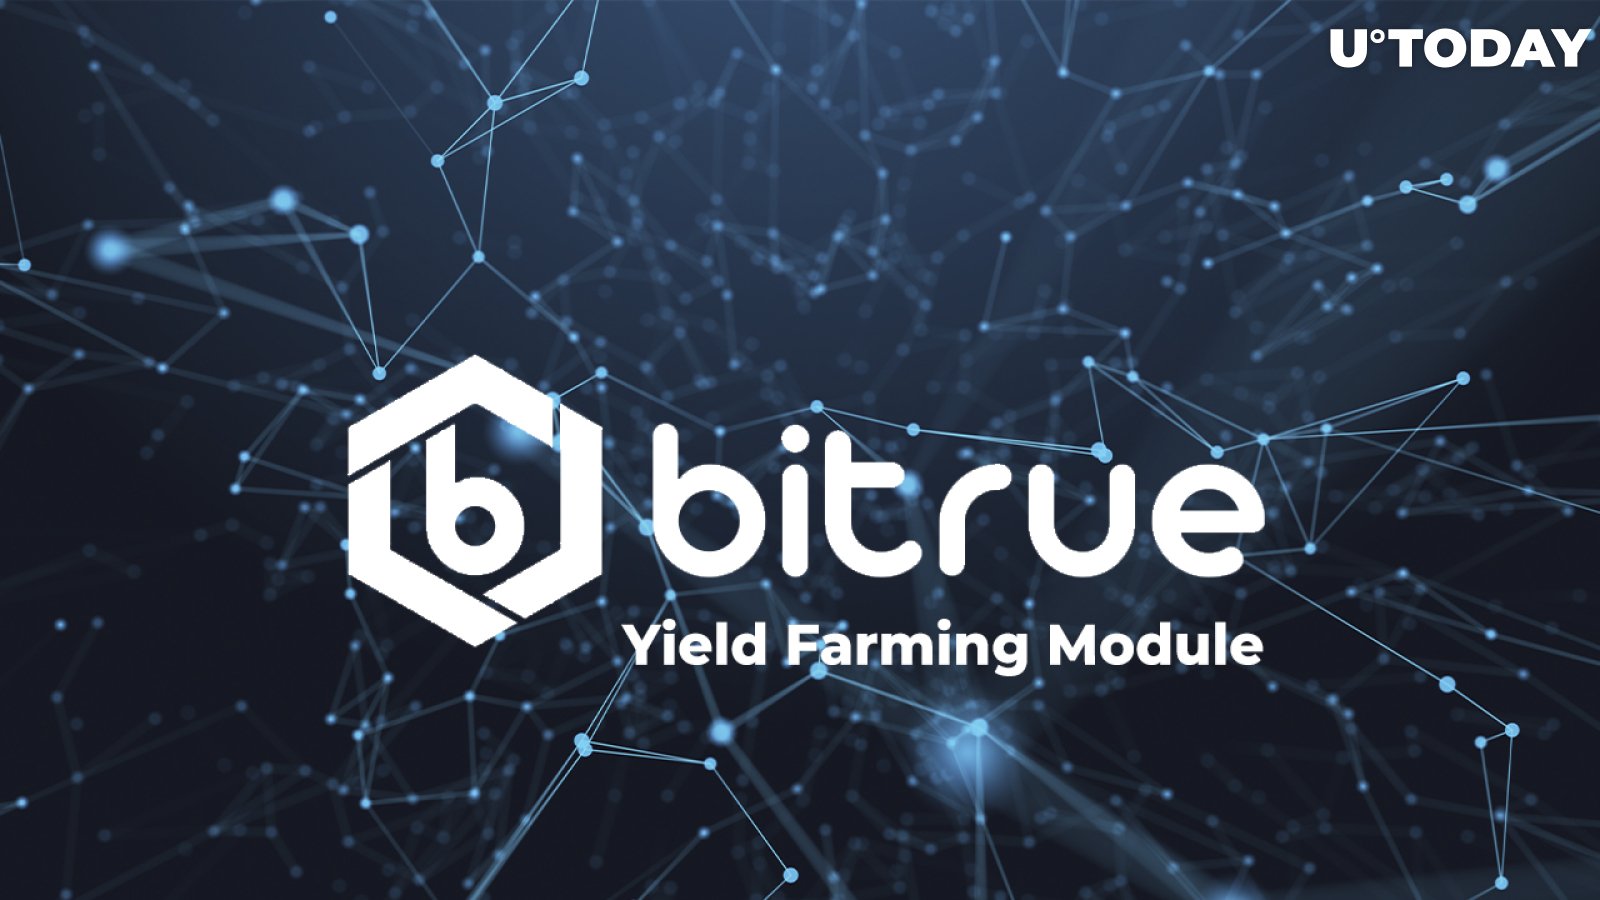 XRP-Centric Exchange Bitrue Launches Updated Yield Farming Module: Details